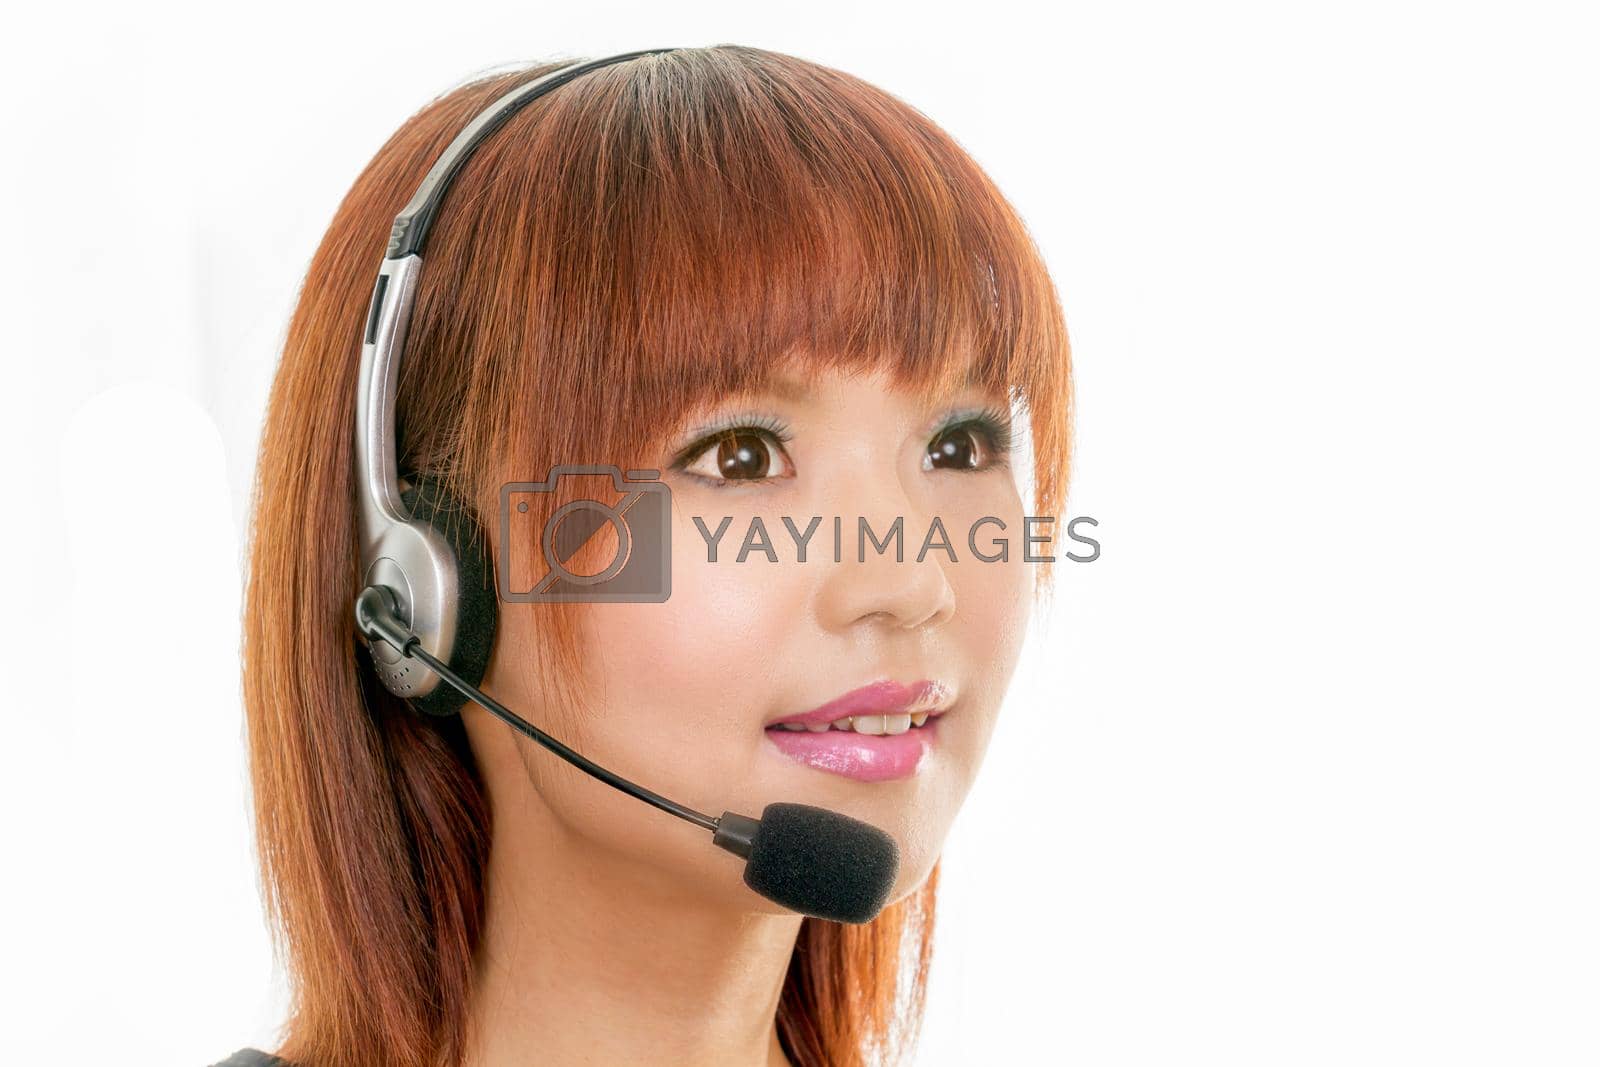 Royalty free image of Woman with headset by imagesbykenny